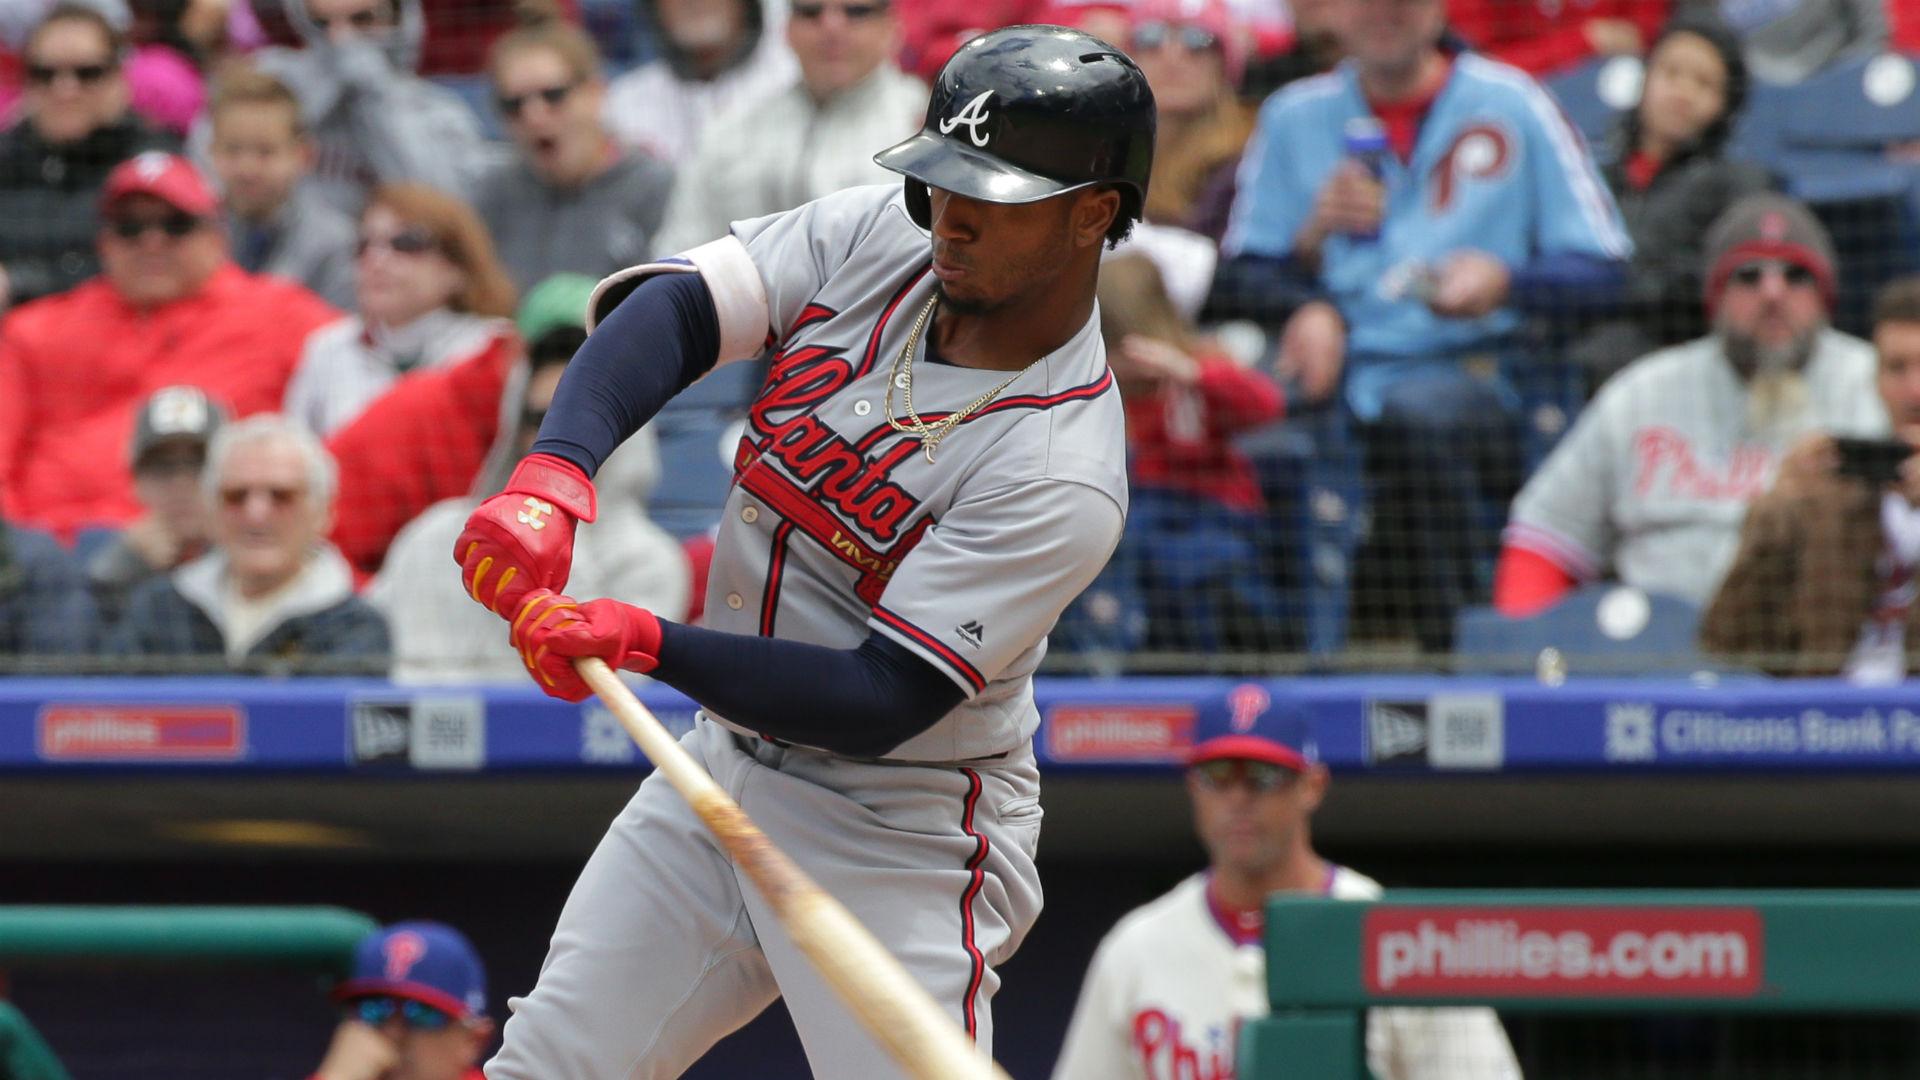 Braves' Ozzie Albies nursing sore foot after HBP, report says. MLB